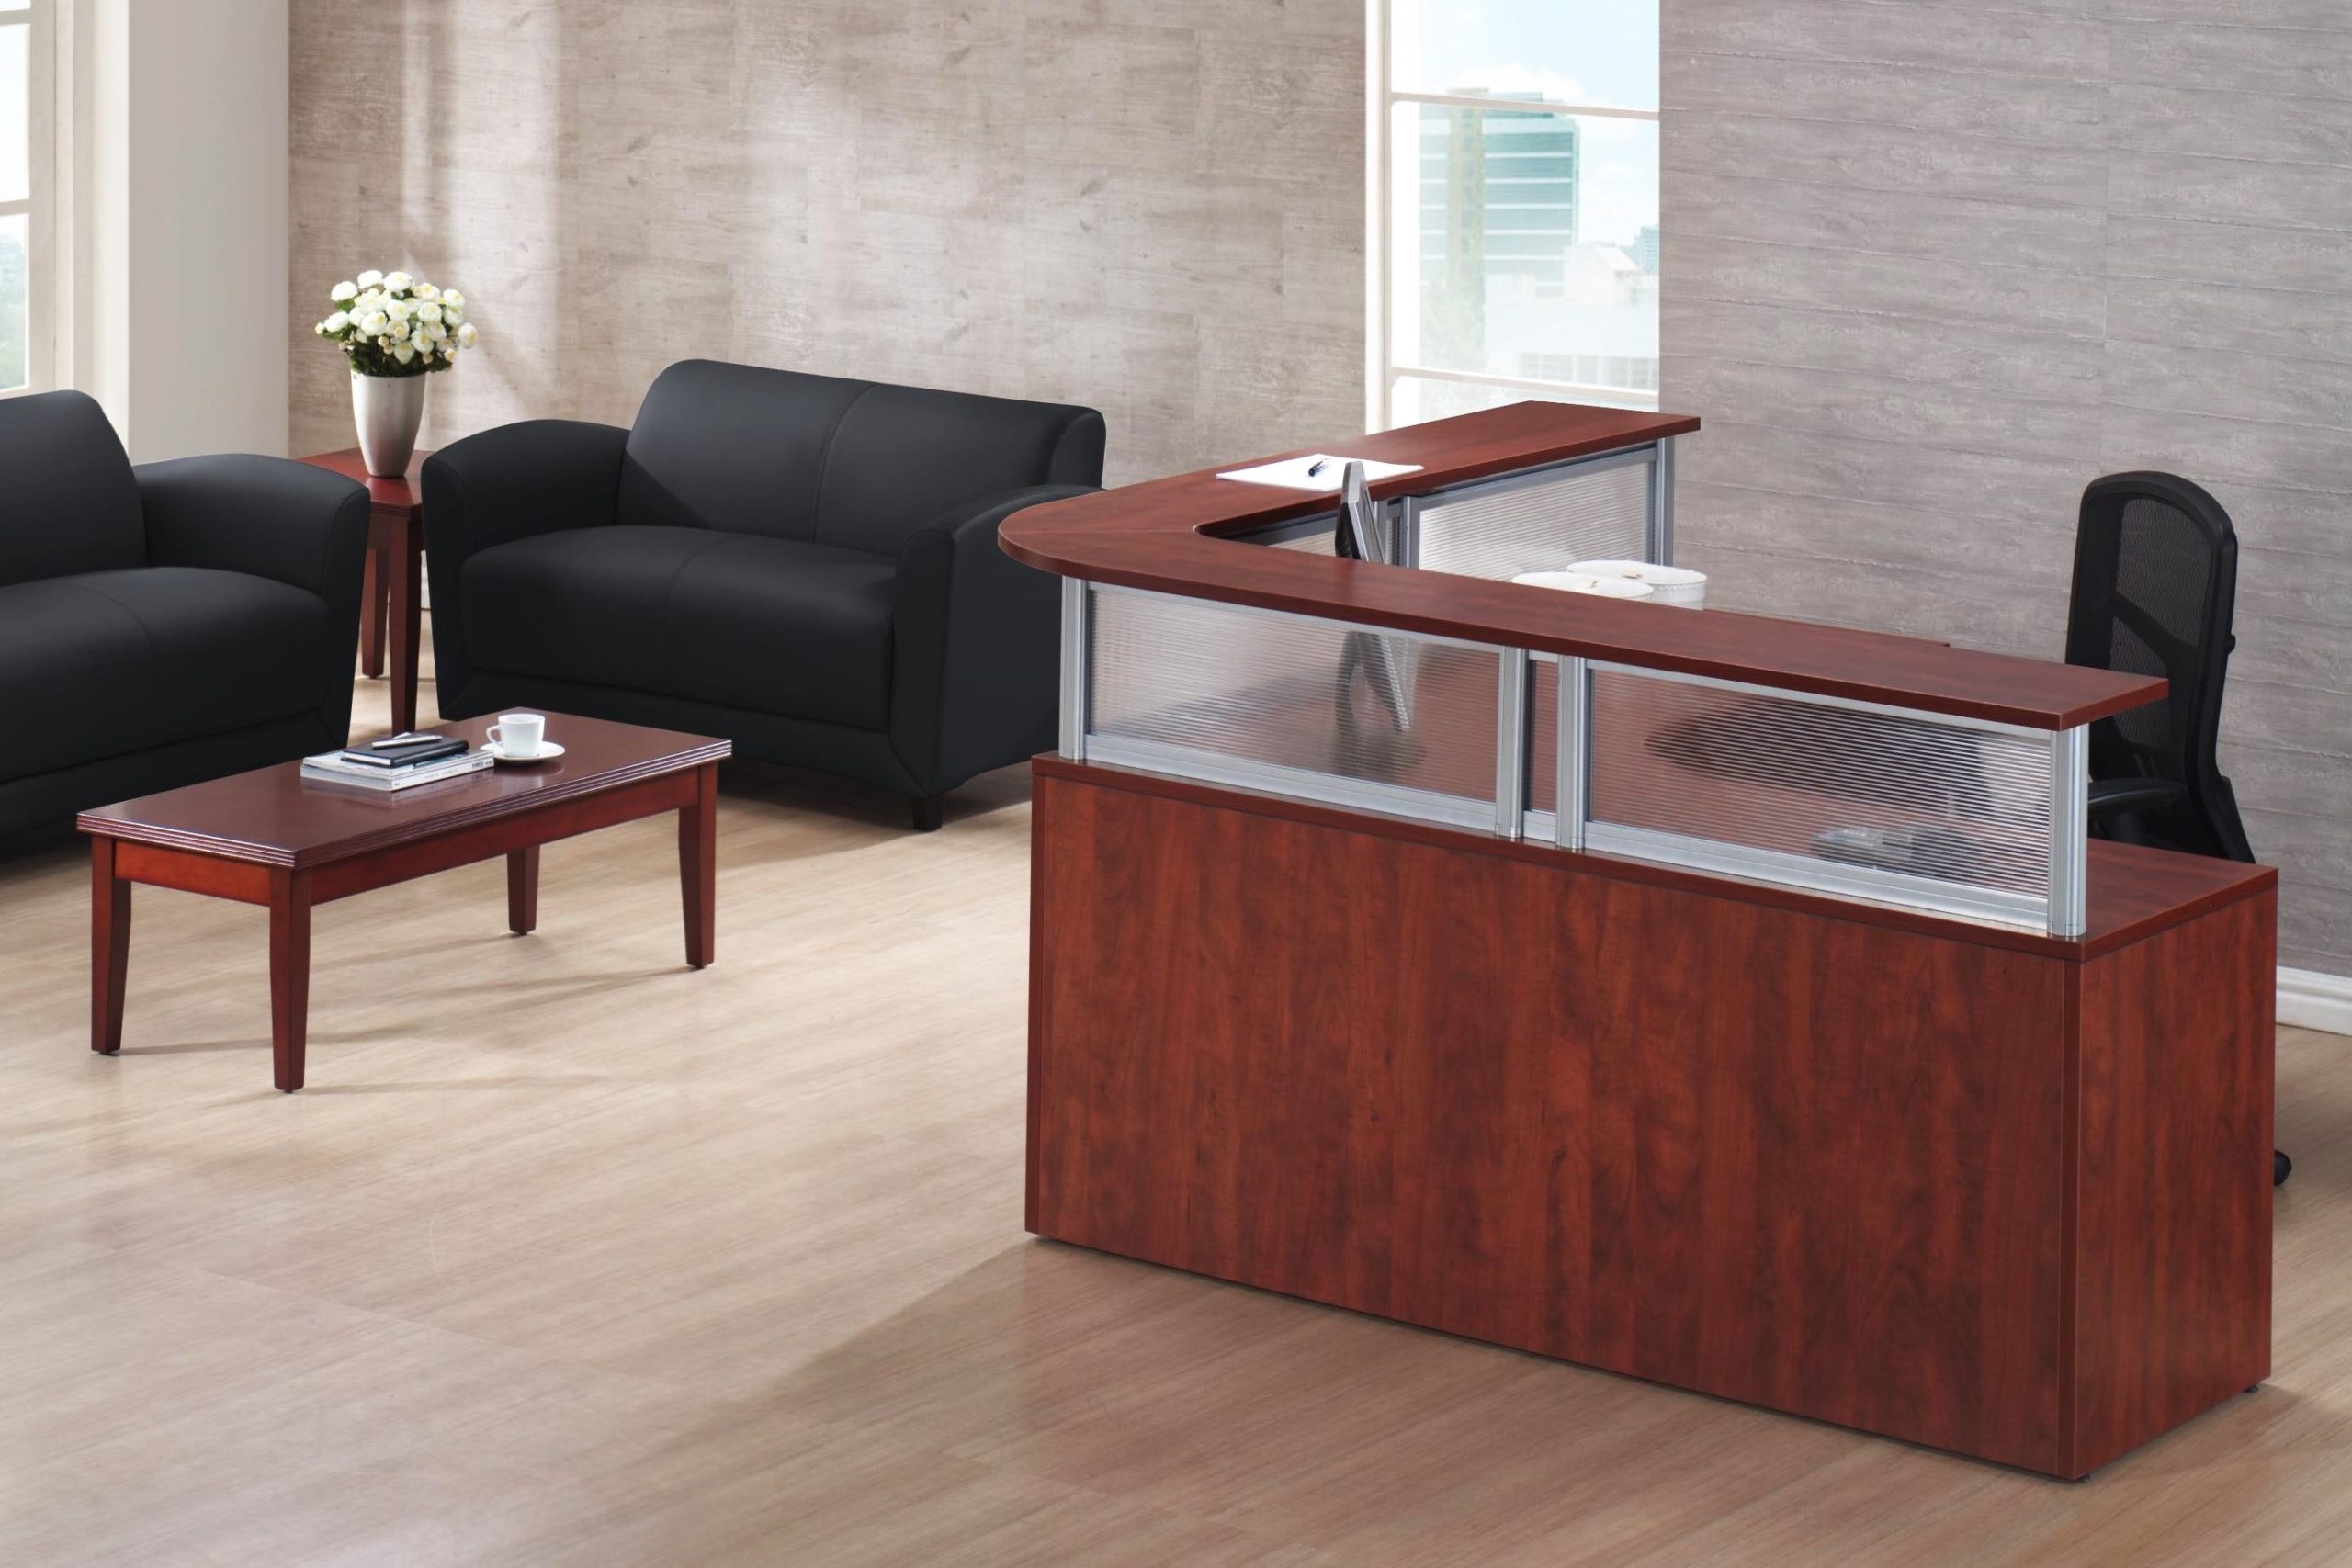 Reception L-group in medium cherry laminate with silver post transaction counter and polystyrene privacy screens.